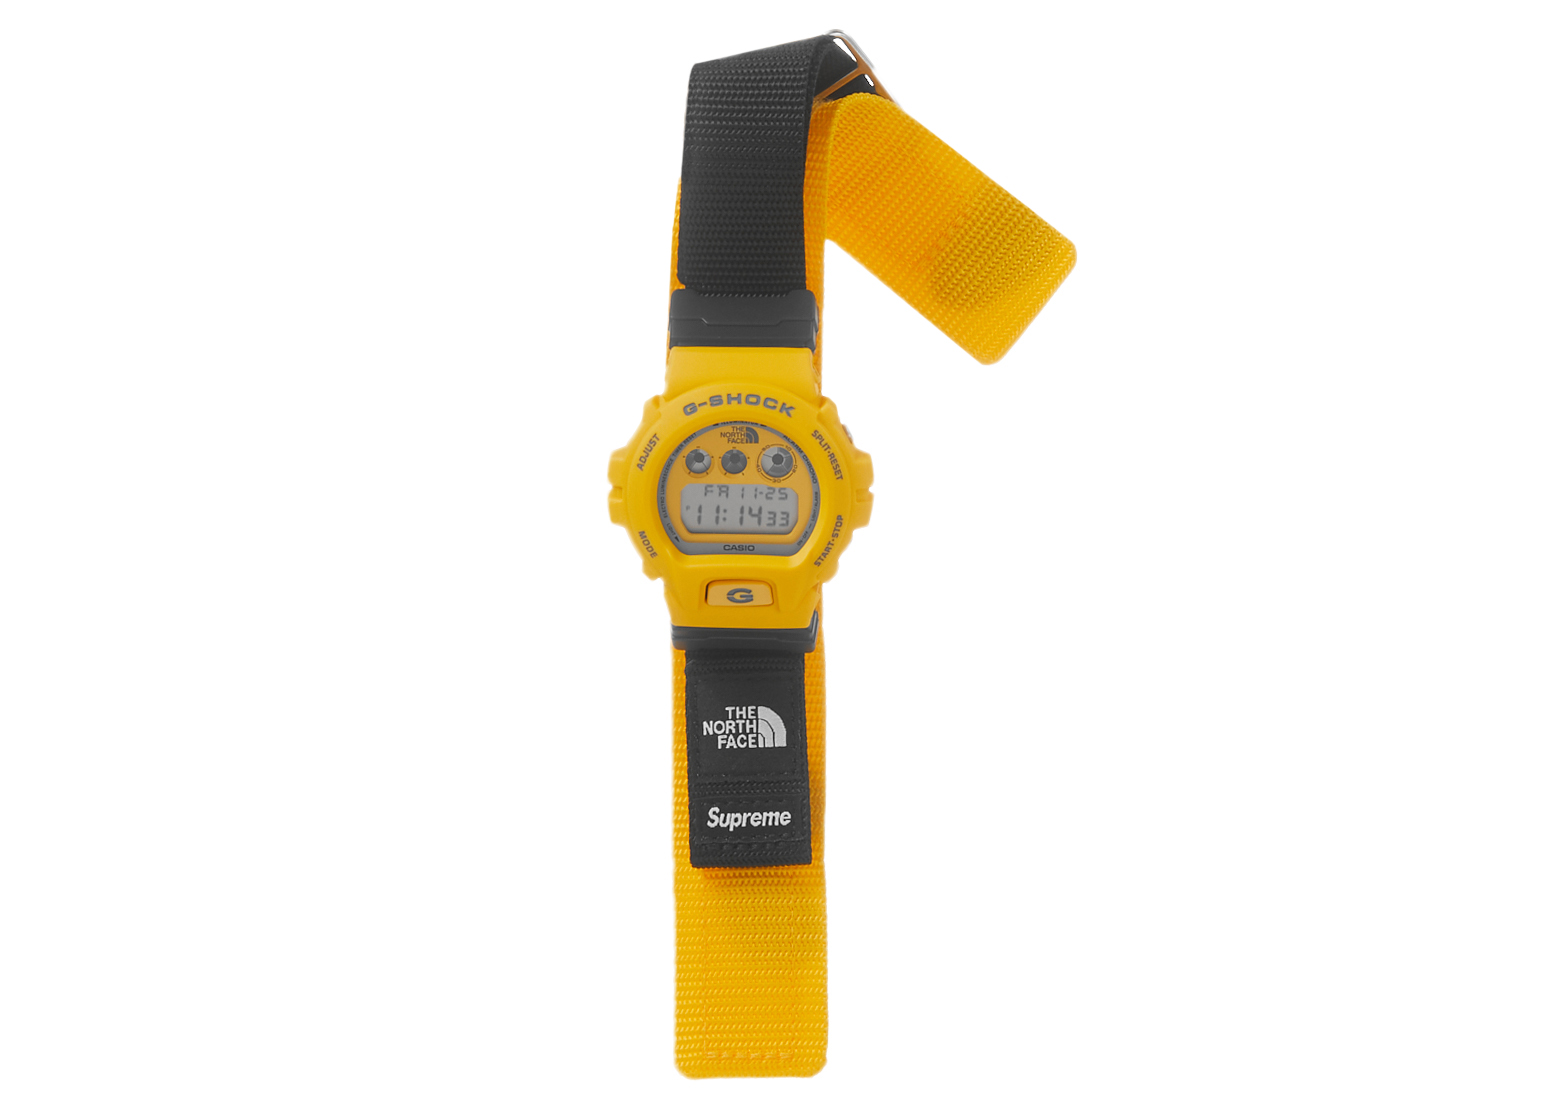 Supreme The North Face G-SHOCK Watch Yellow - FW22 - US